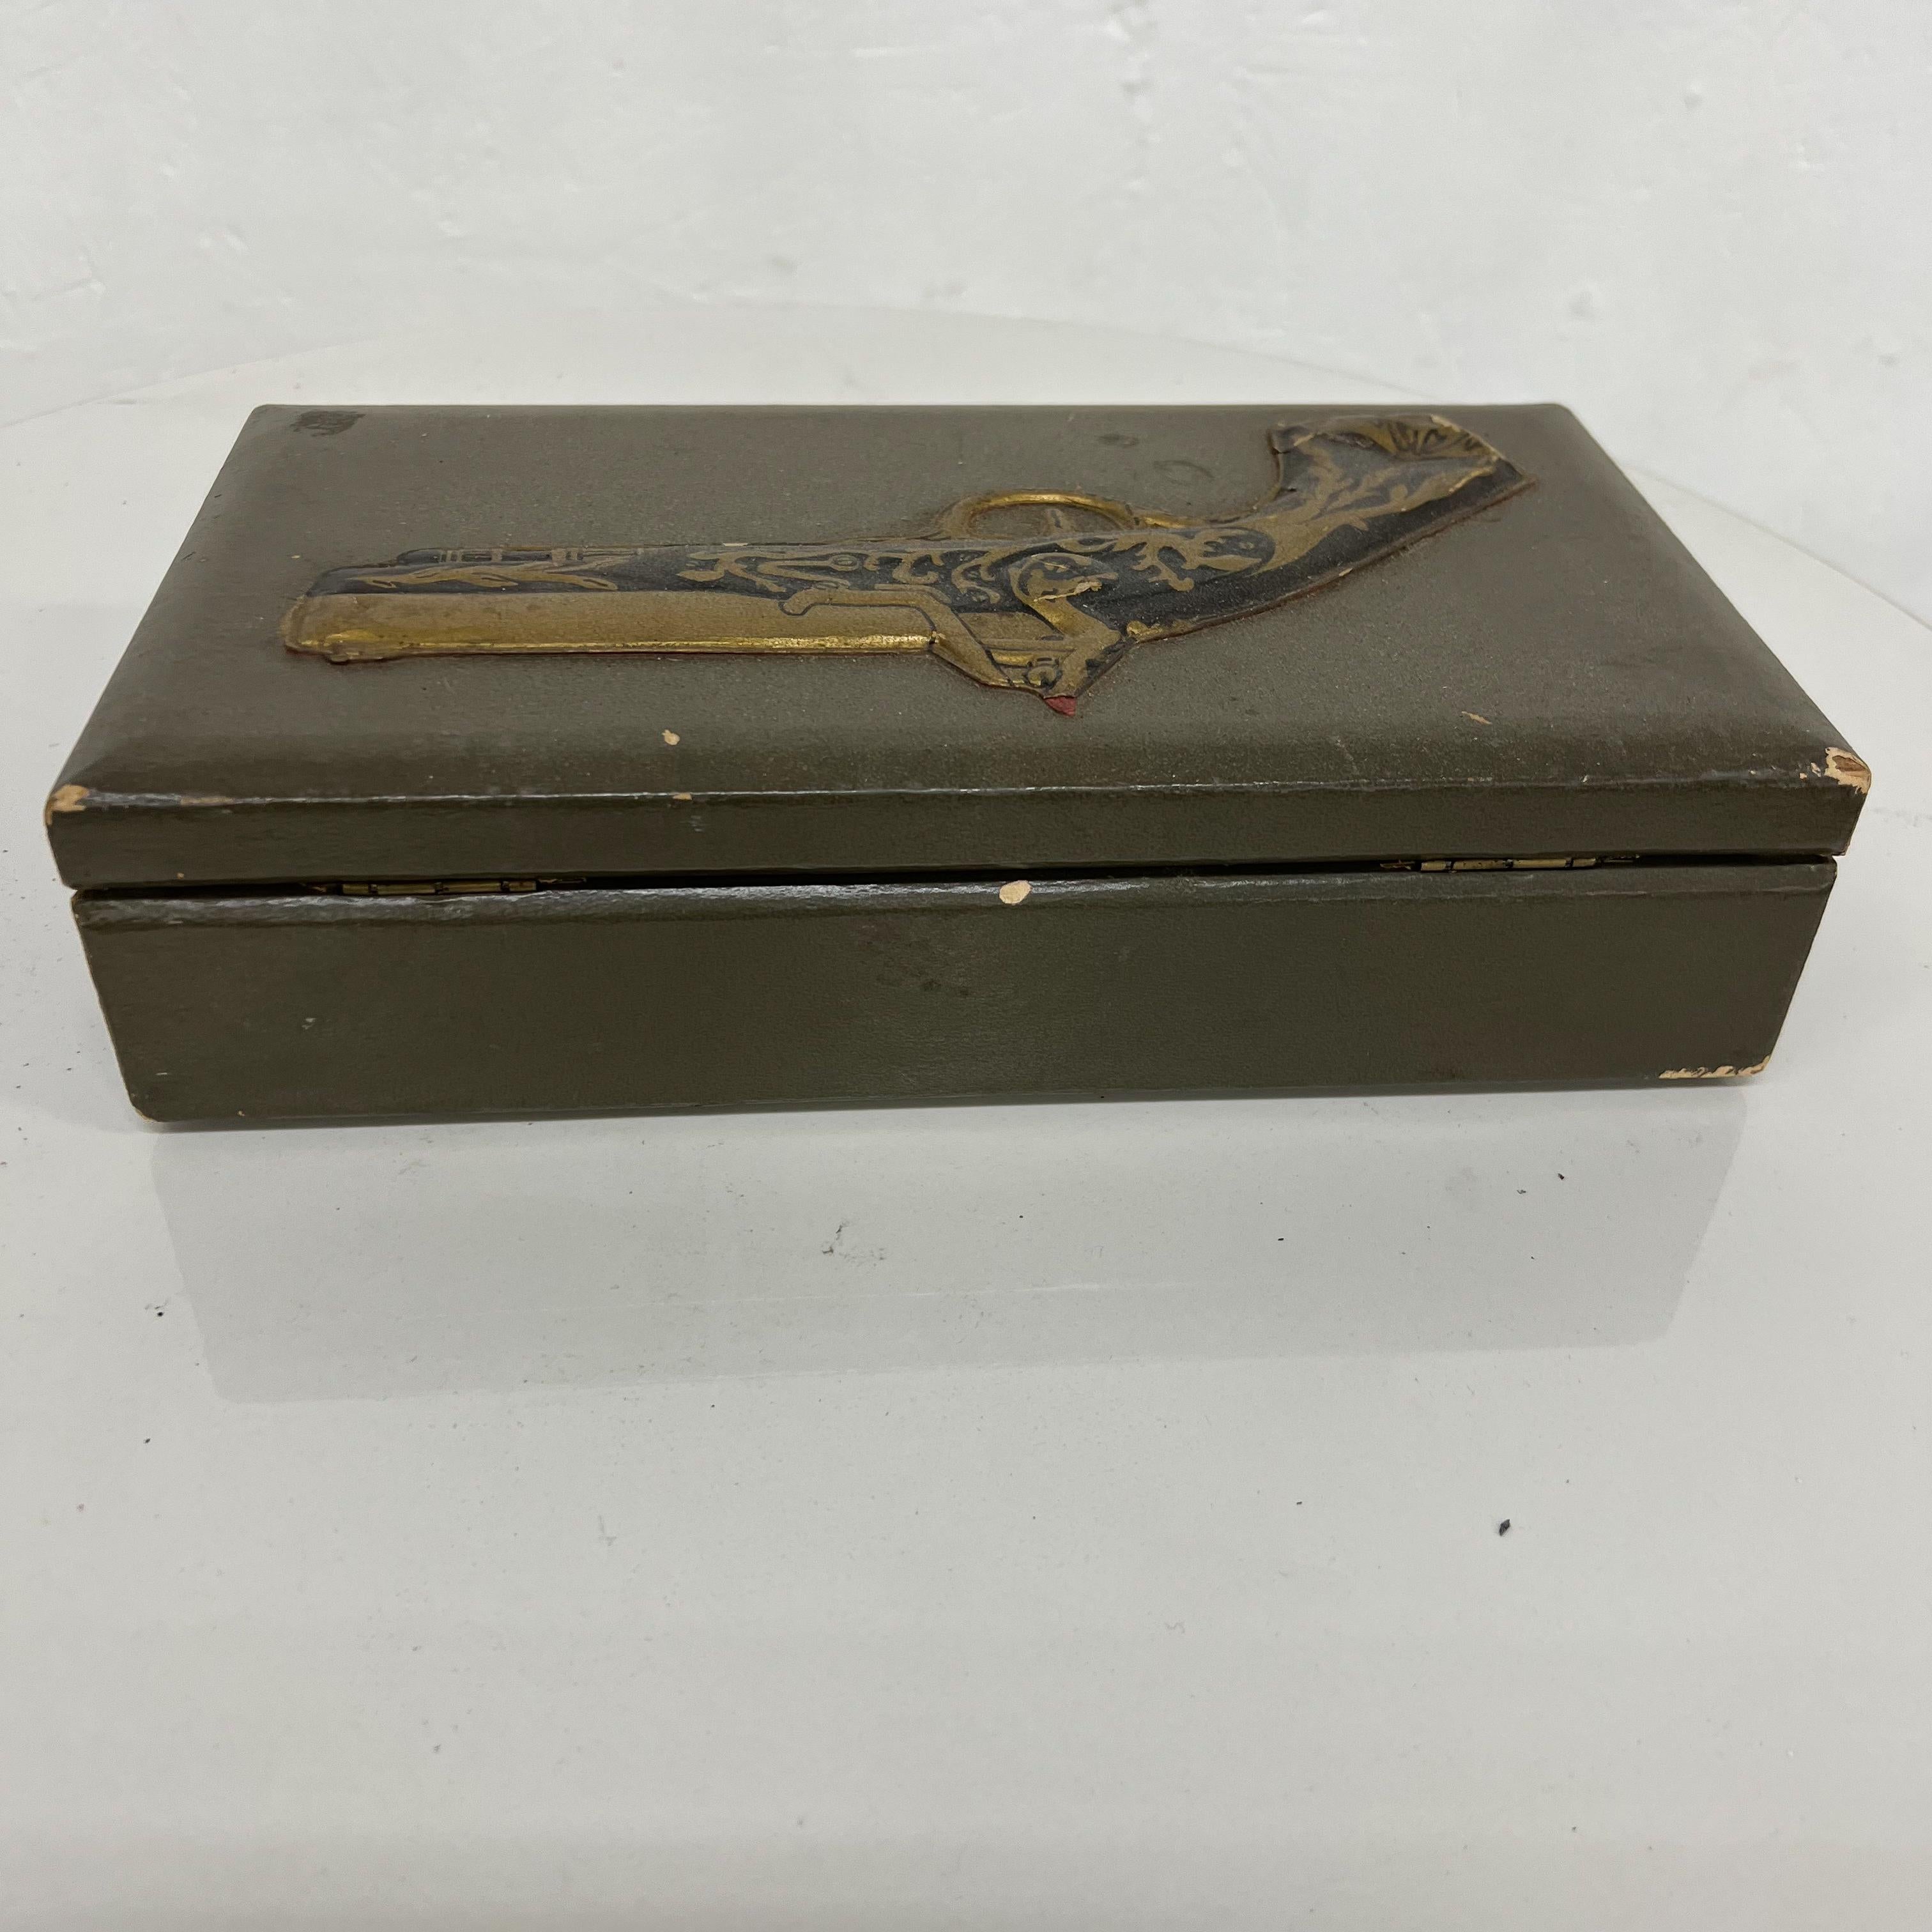 1950s Decorative Old Pistol Box Sectioned Jewelry Case Distressed Vintage